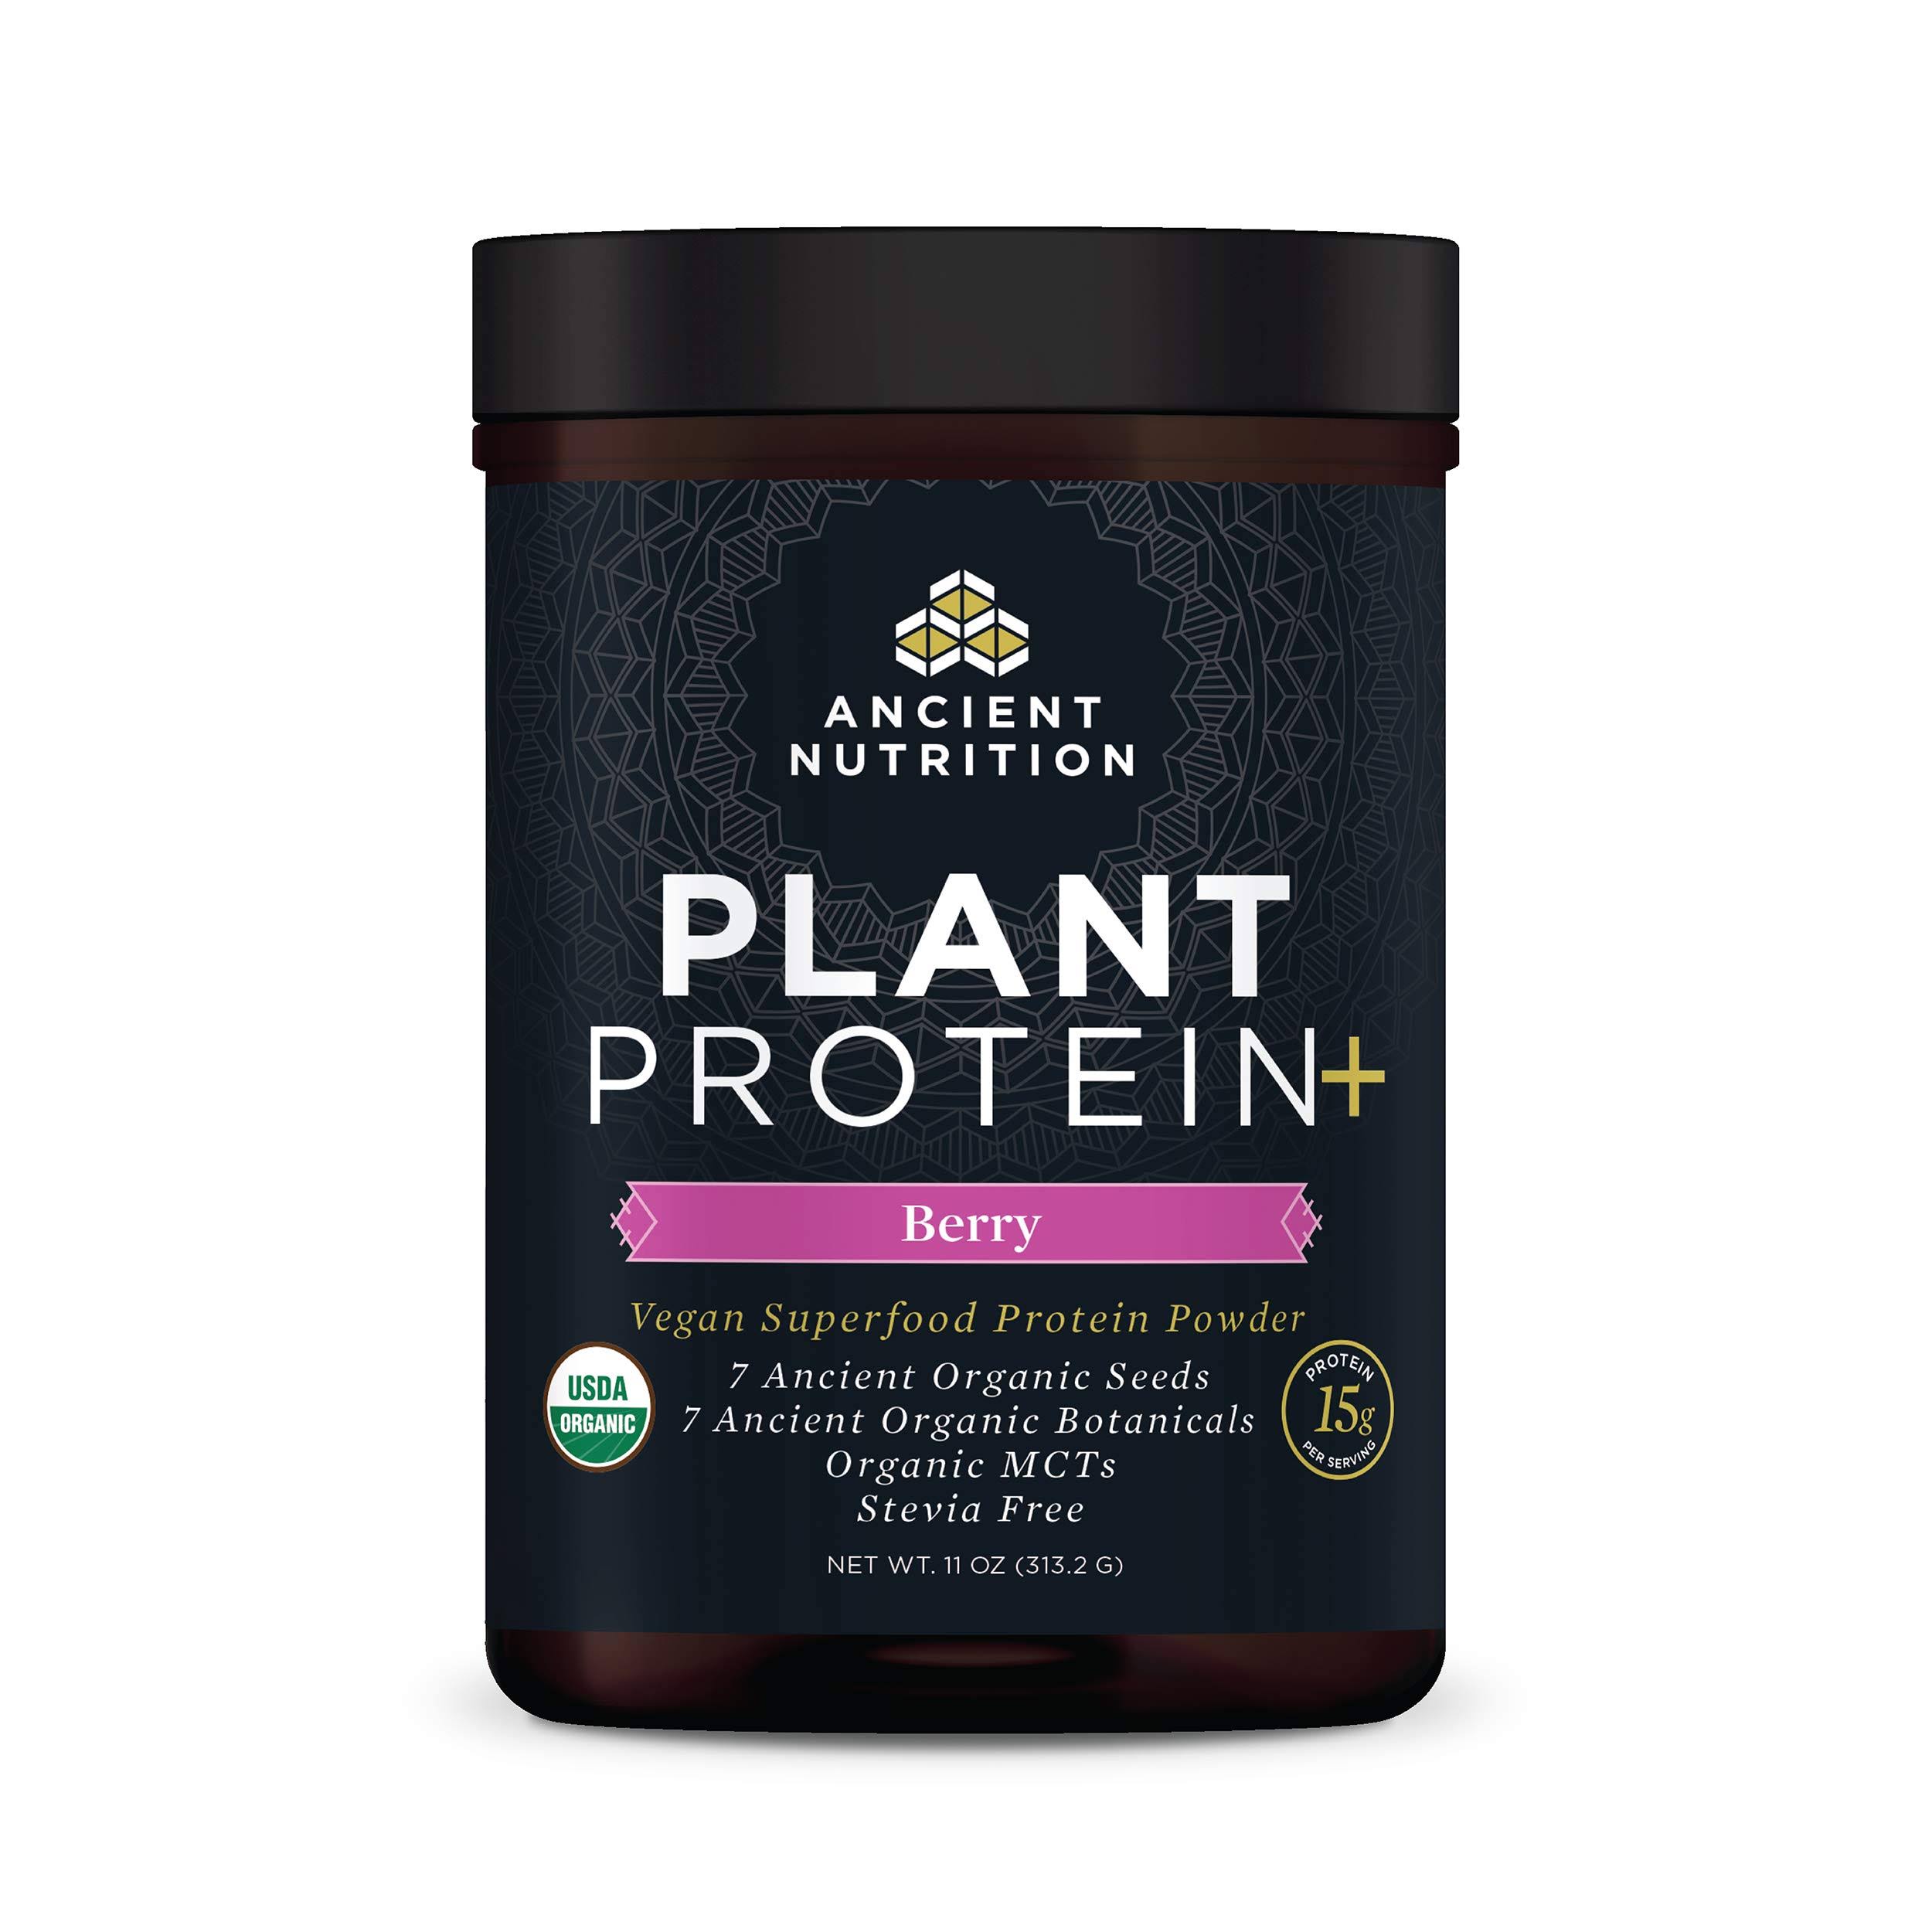 Ancient Nutrition Berry Plant Protein+ Powder 11oz